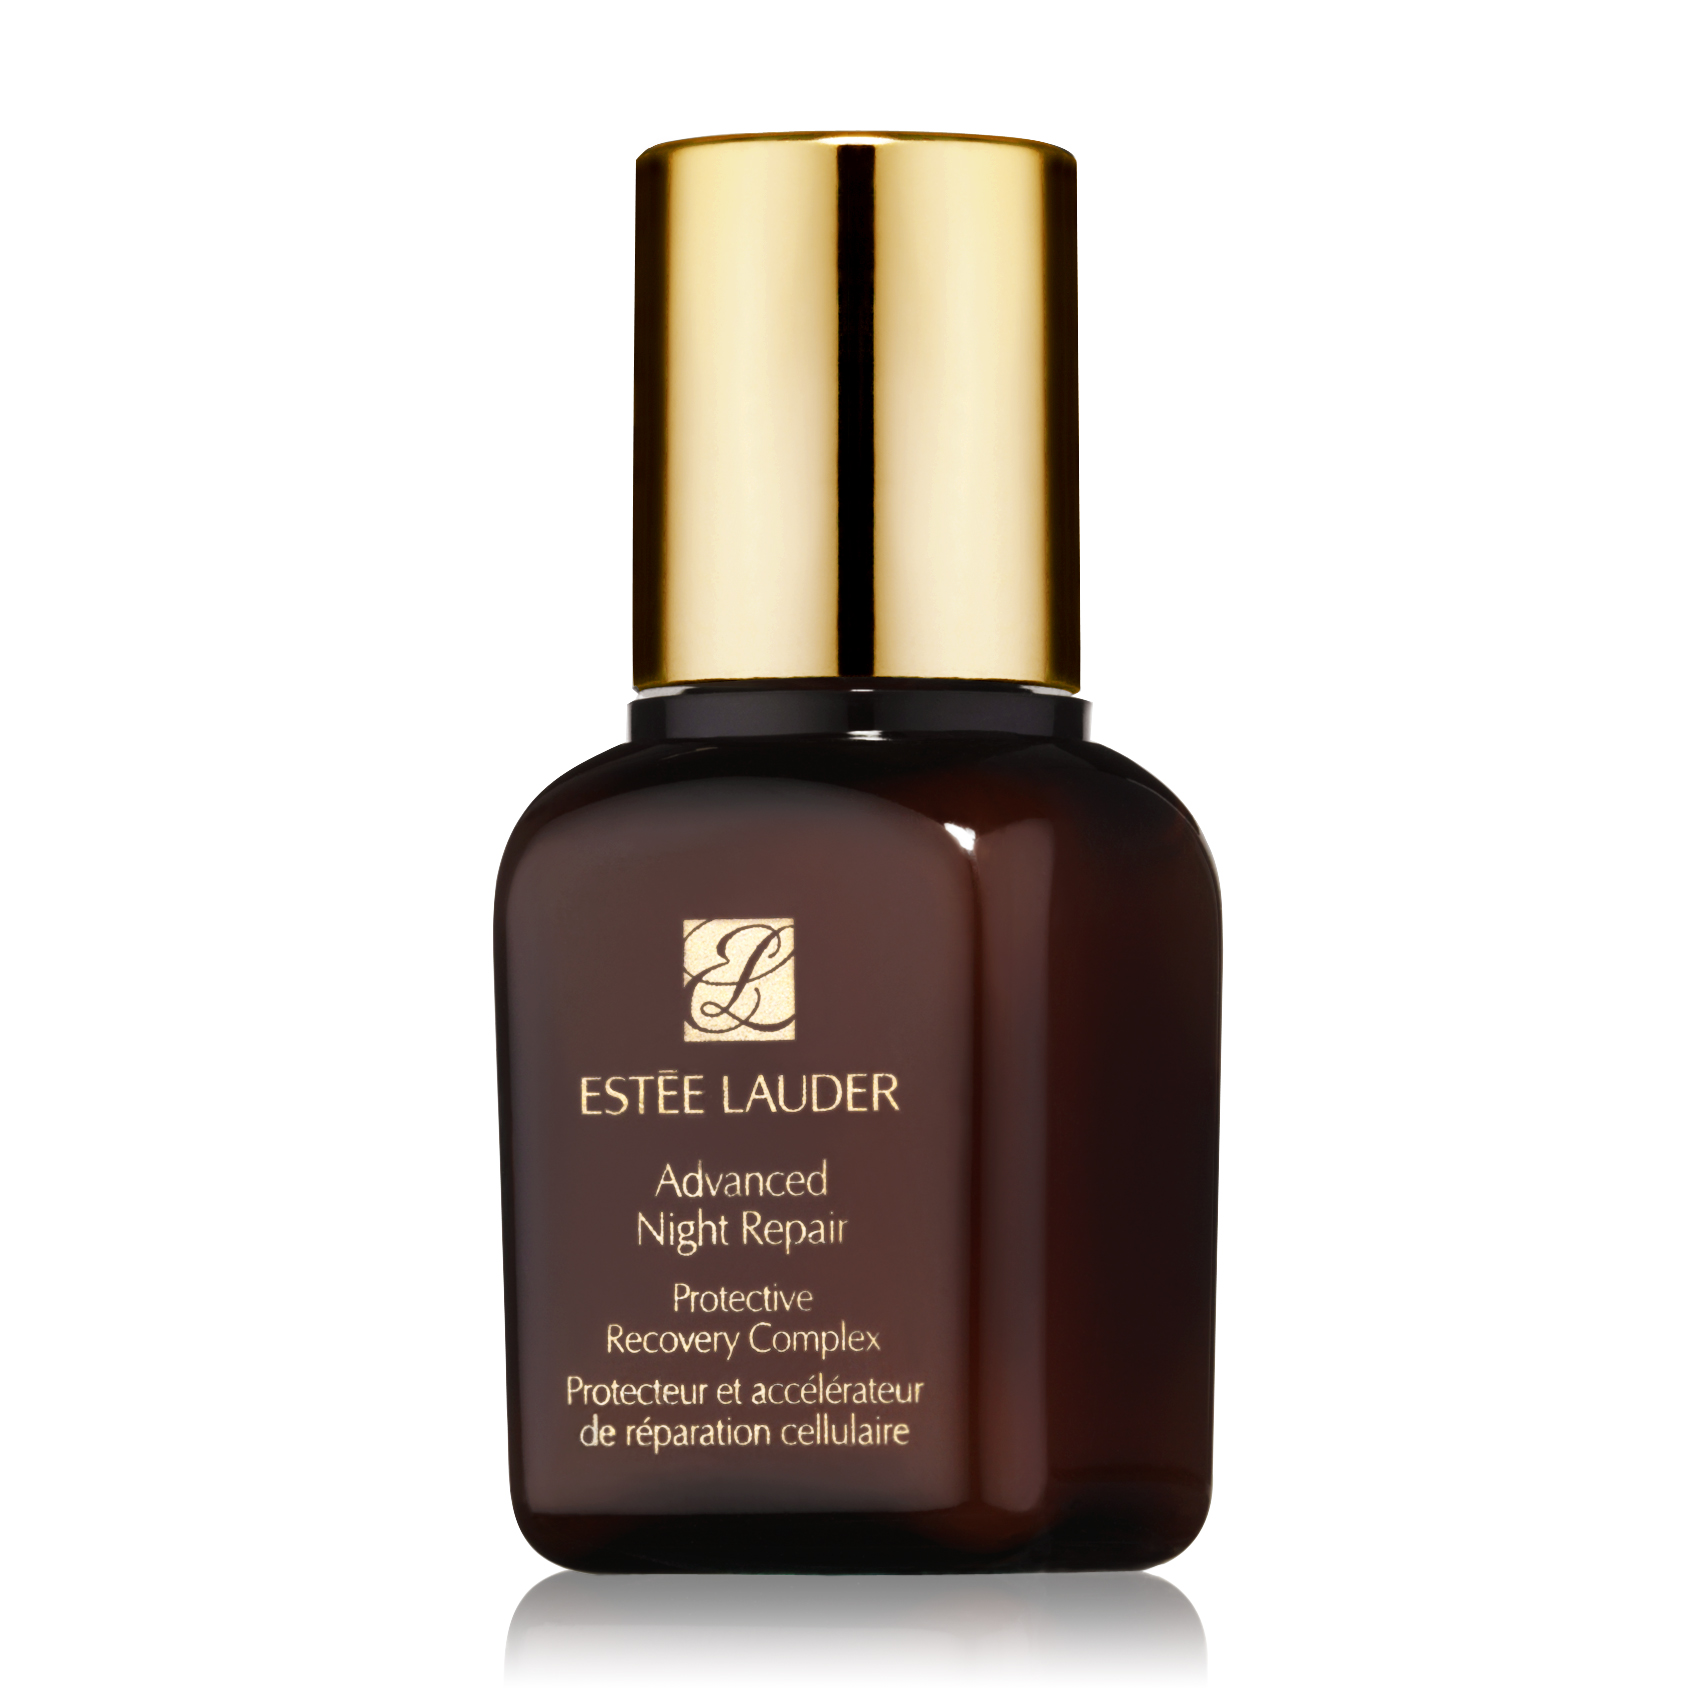 Estee Lauder Advanced Night Repair Recovery Complex 0.5 Oz New & Unboxed $24.90 + $4.49 shipping 